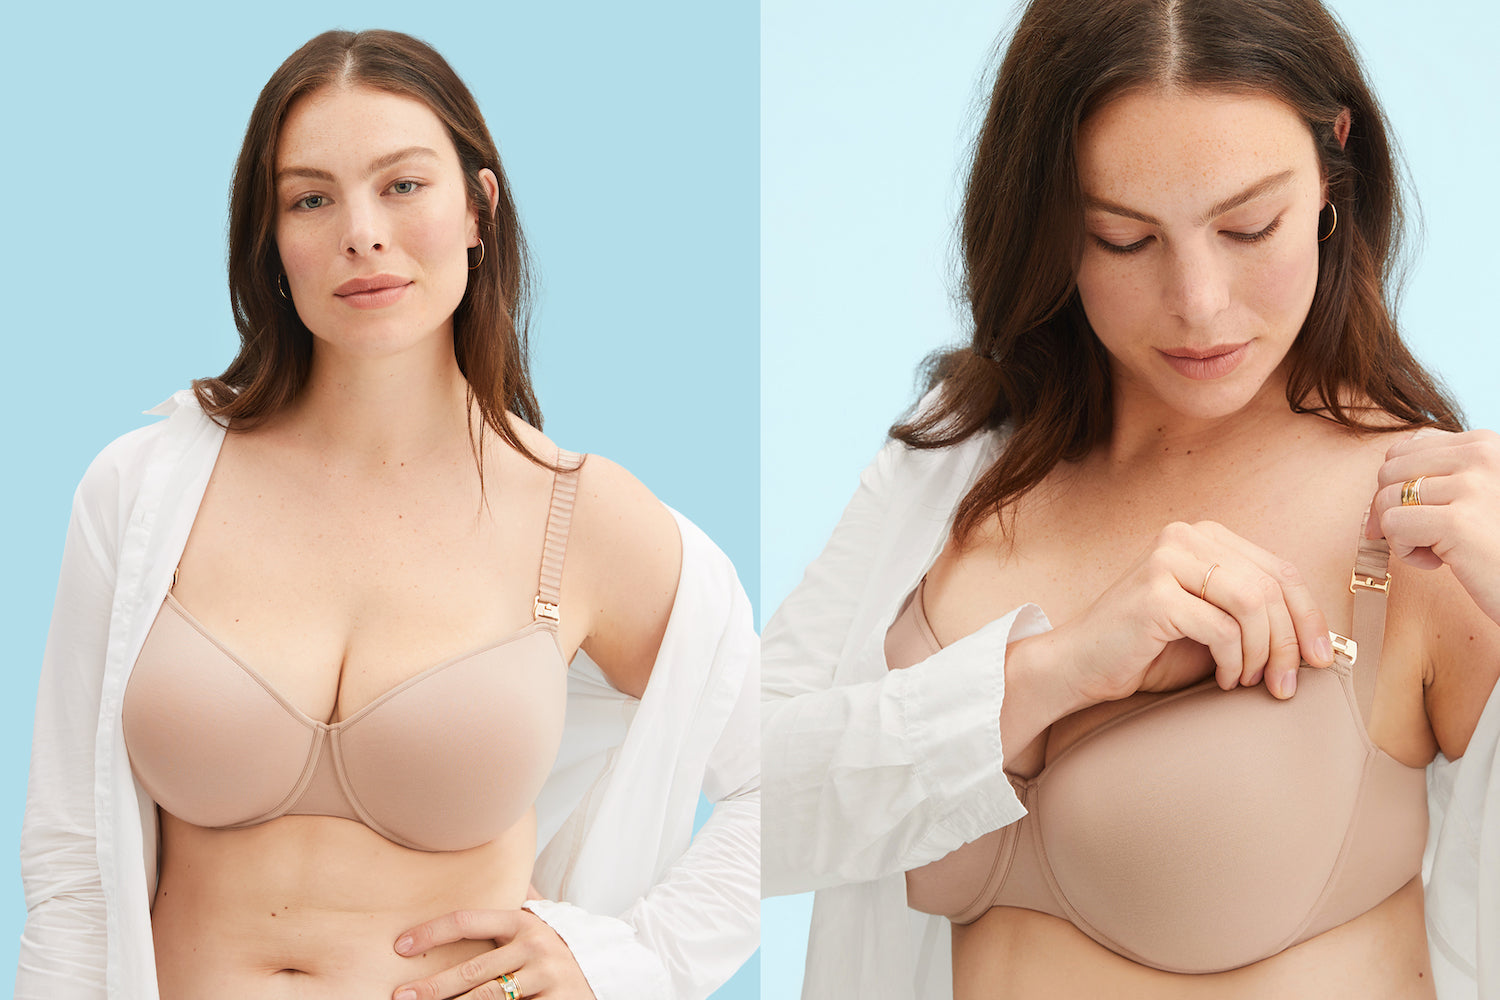 Top 4 Most Supportive Nursing Bras for Large Breasts - Best